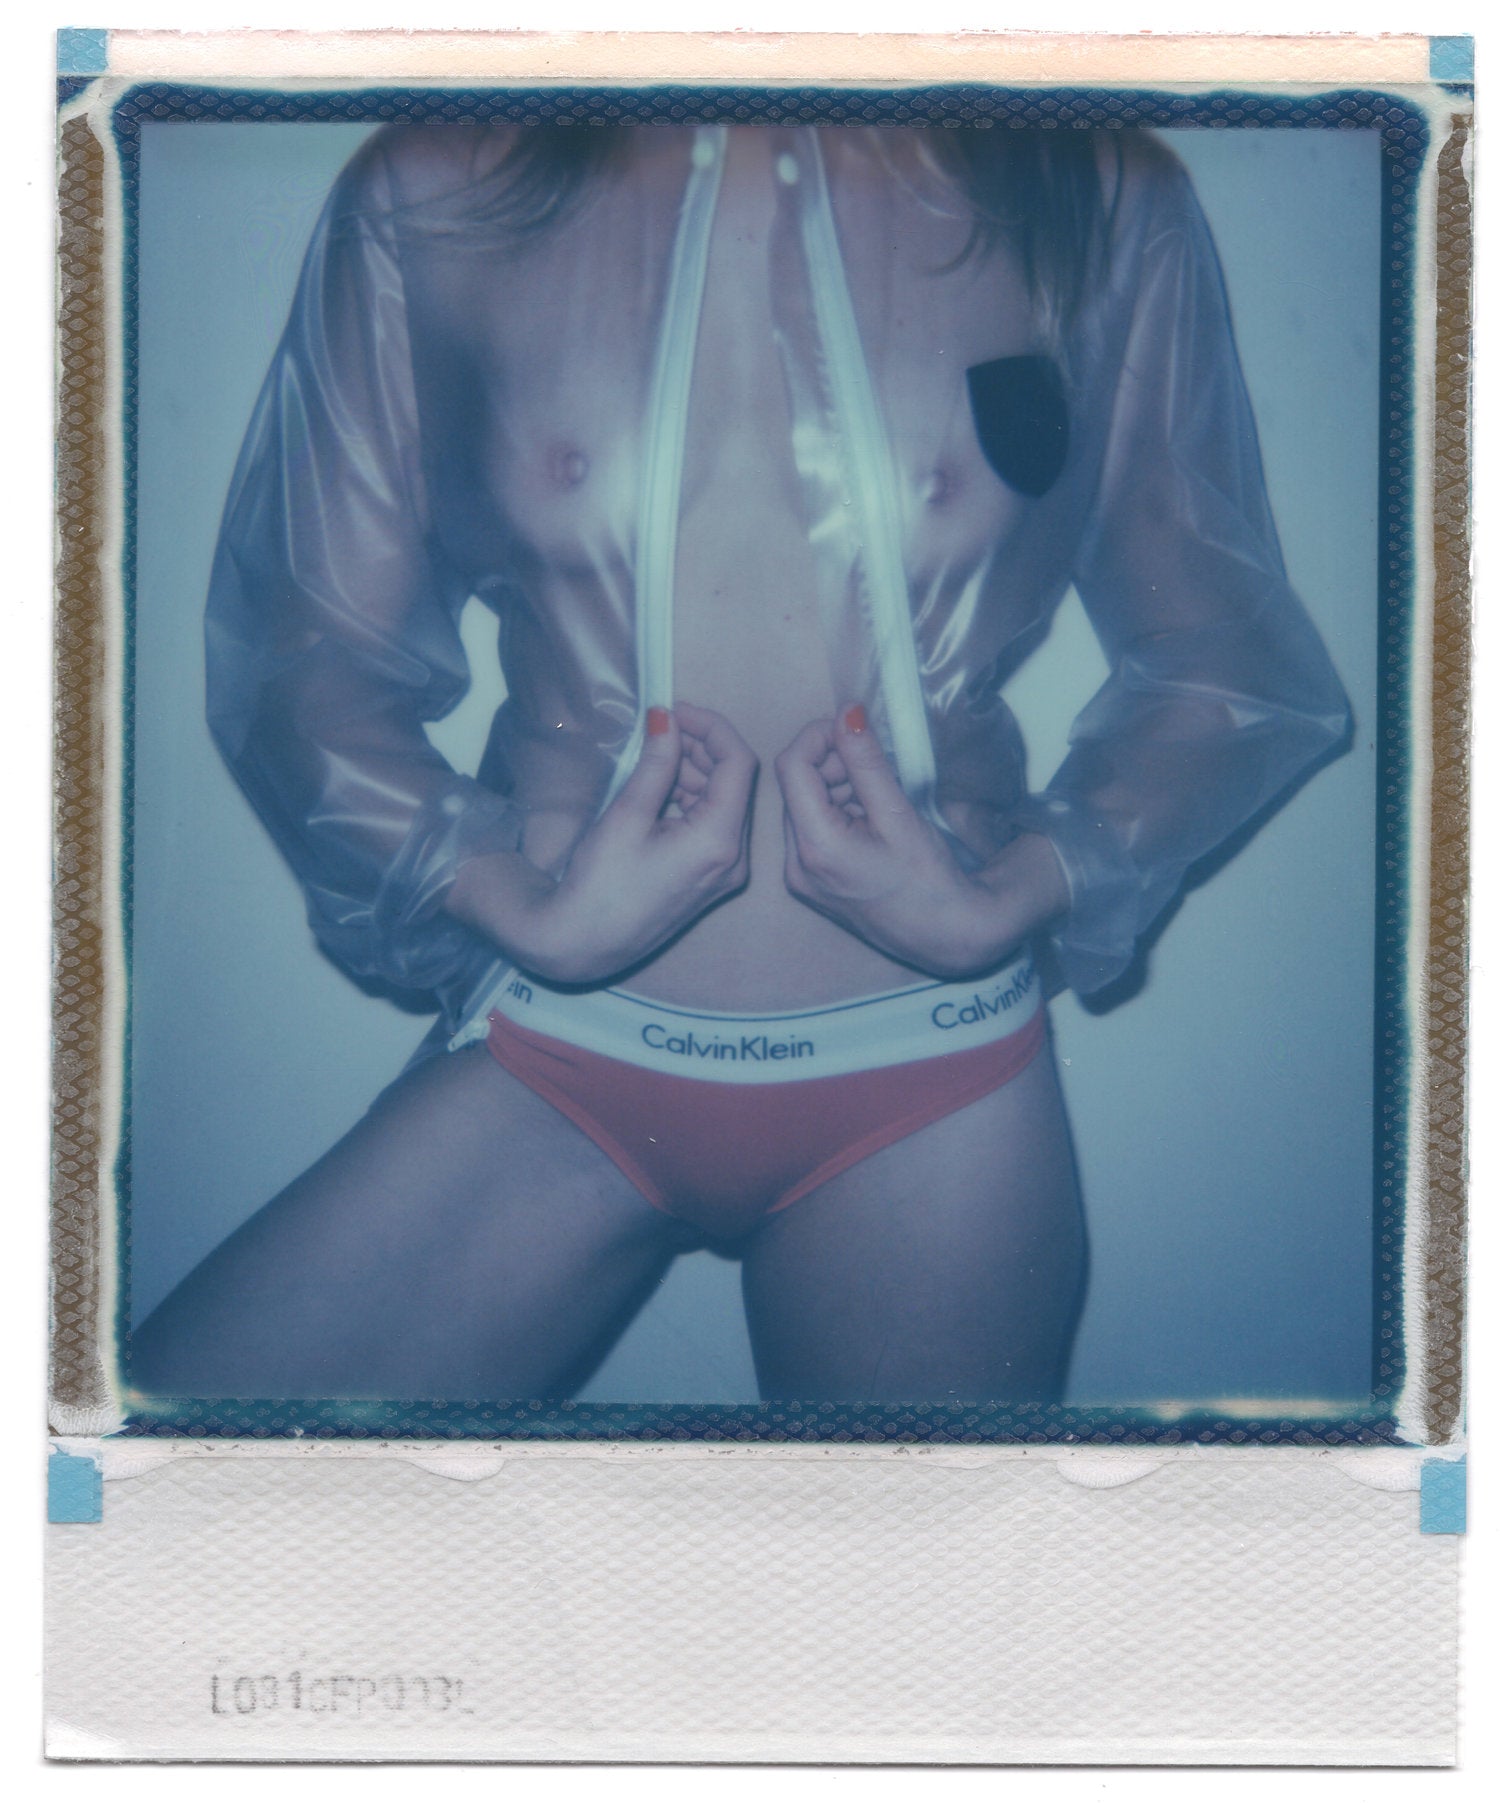 Moore Polaroids - Another Filthy Magazine - Photo 6